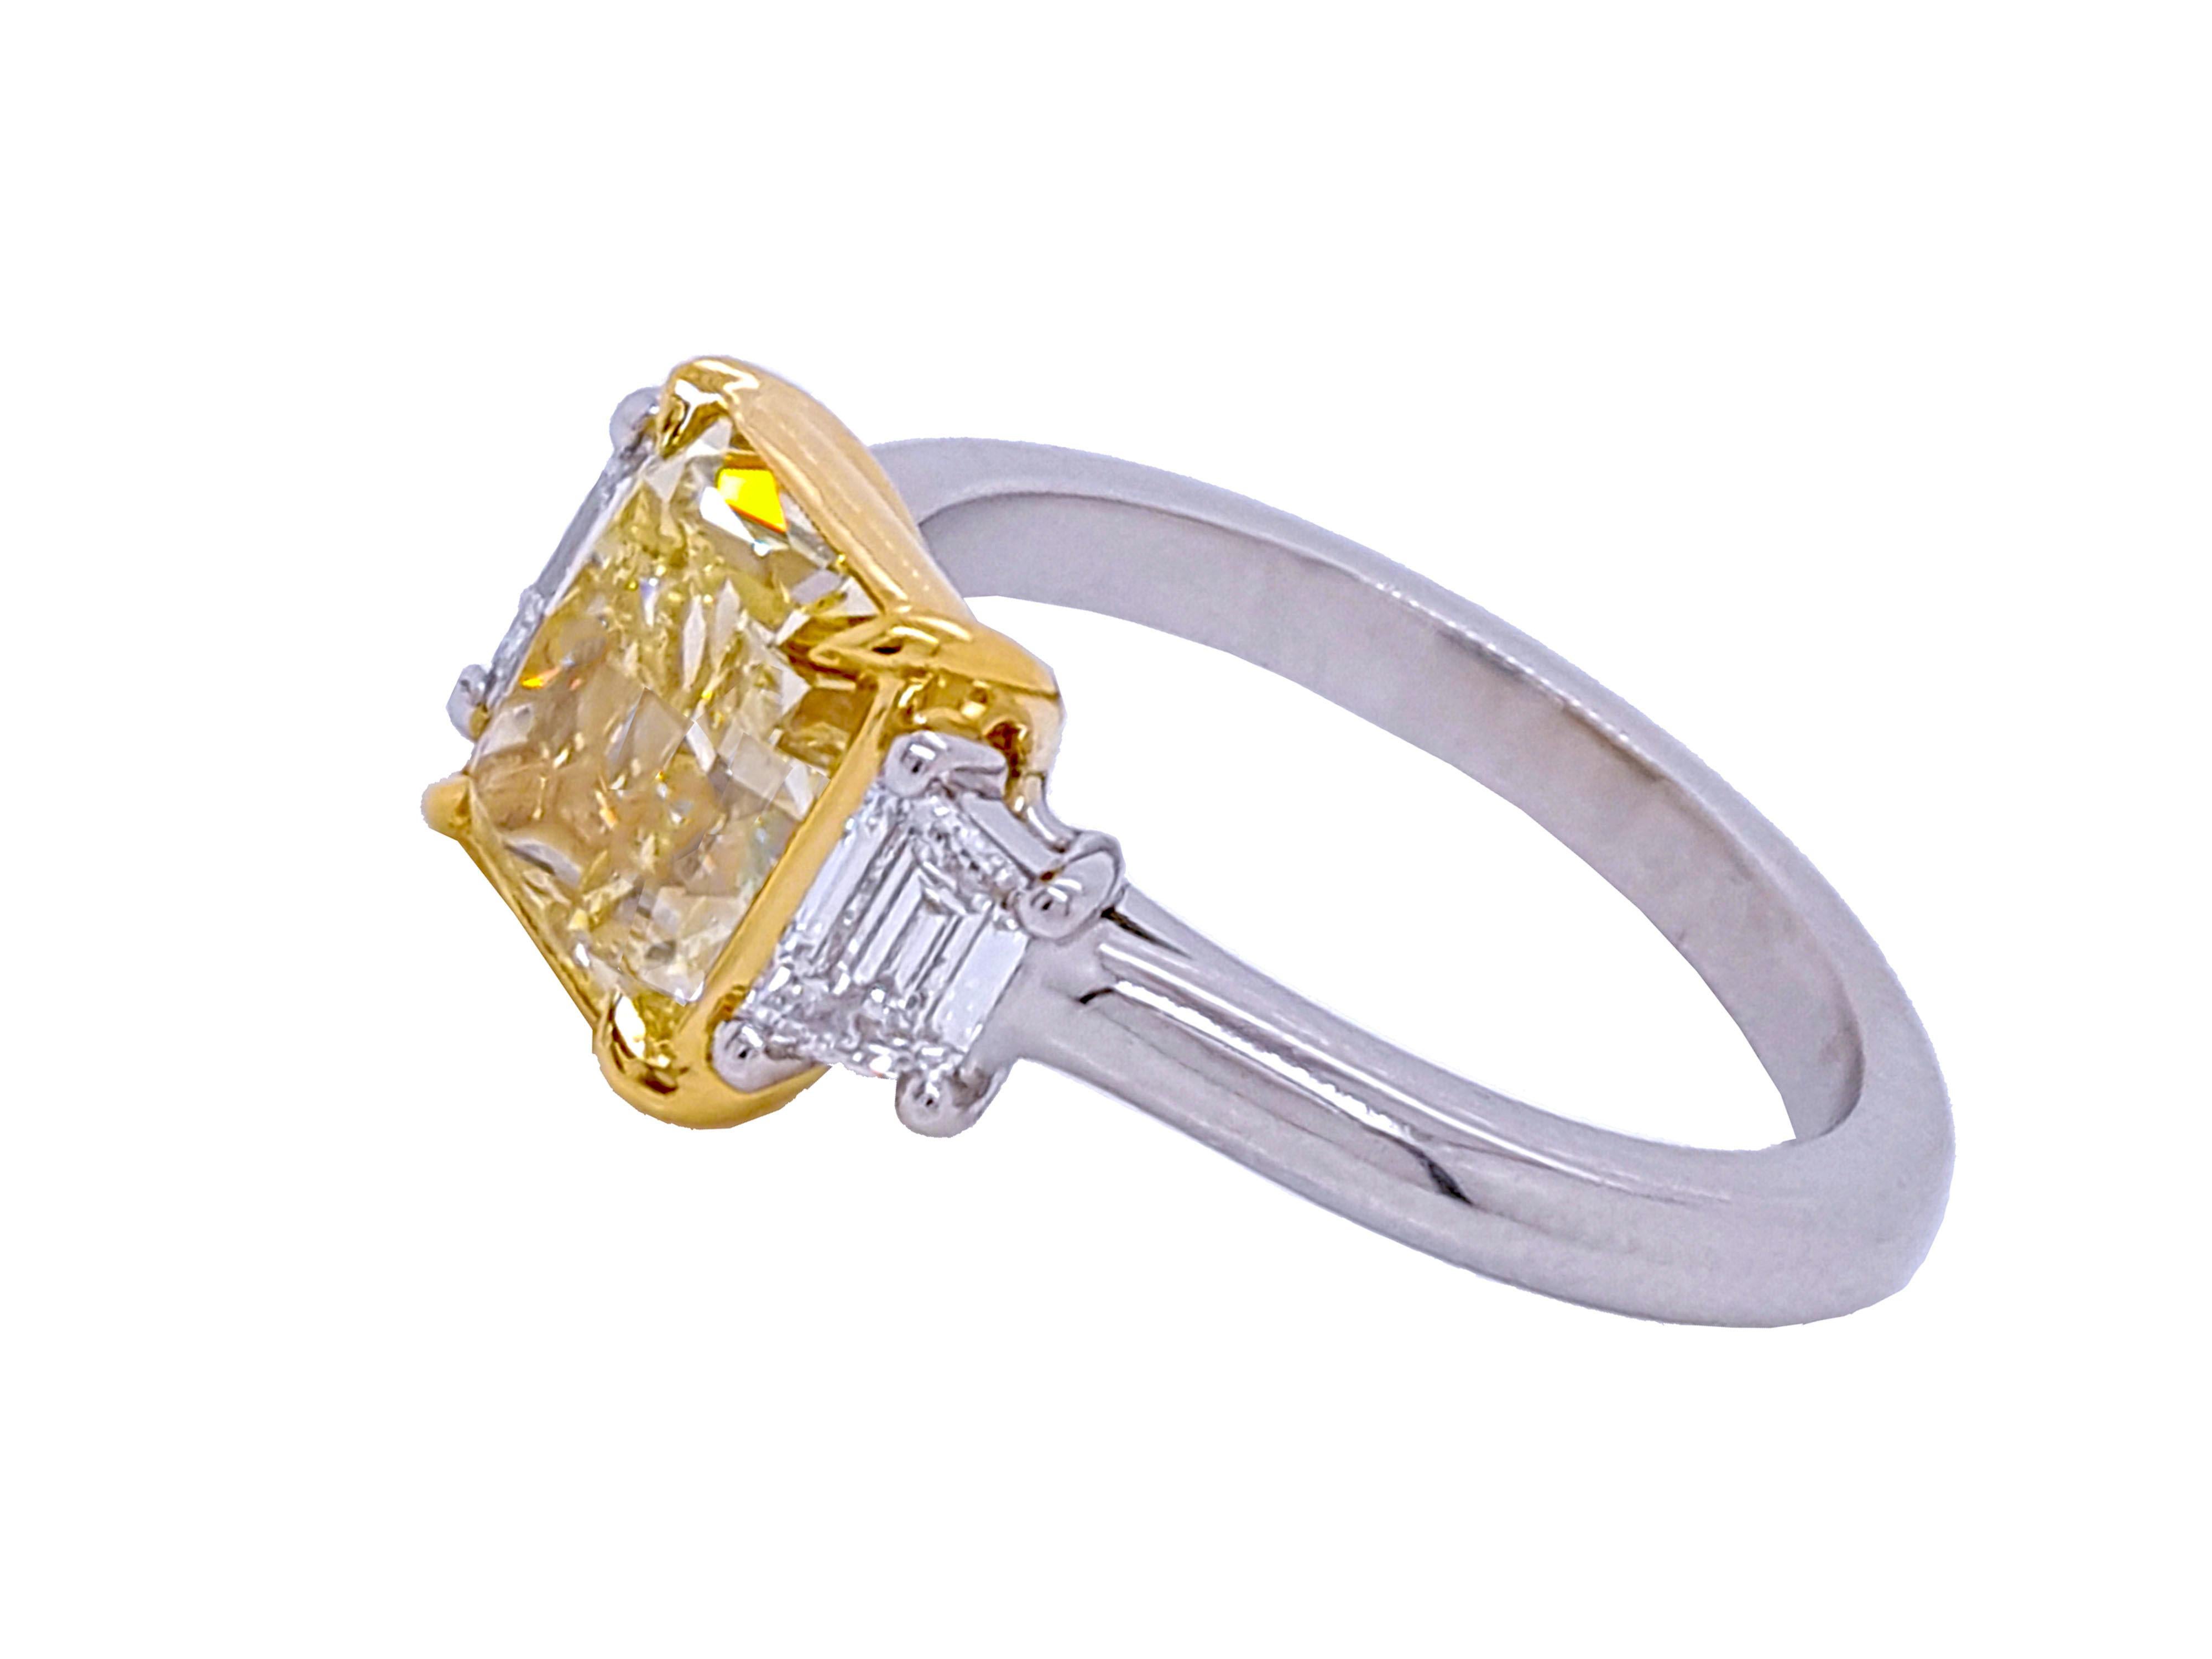 Absolutely stunning engagement ring style showcasing a Fancy Yellow 2.56 carat rectangular cut diamond certified by GIA as VS2 clarity. Flanked by two Trapezoid cut diamonds total weight 0.48 carat. VVS1.

This piece was handmade at the Novel